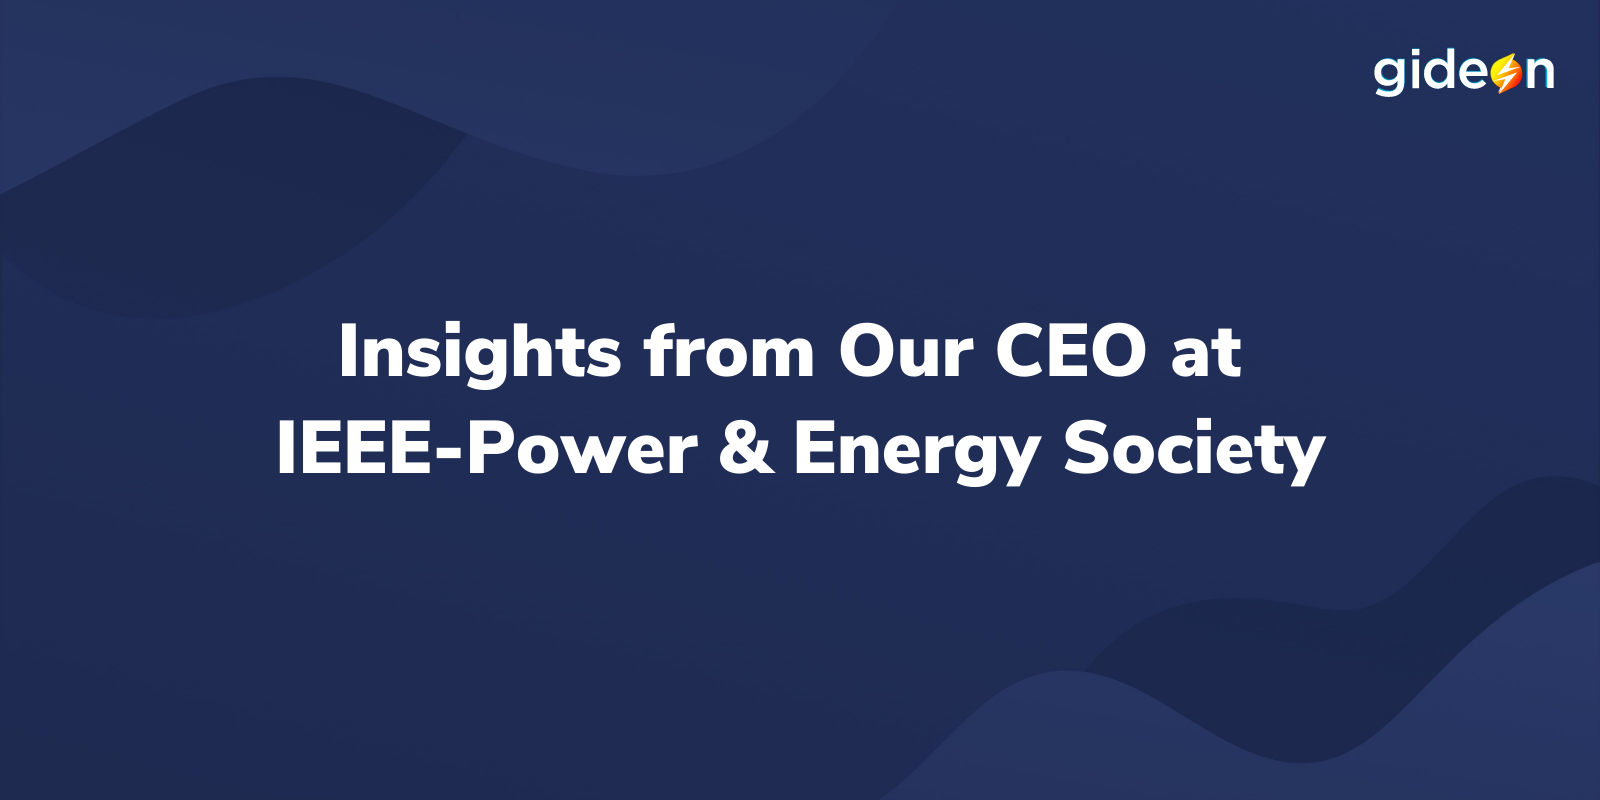 Insights from Our CEO at IEEE-Power & Energy Society